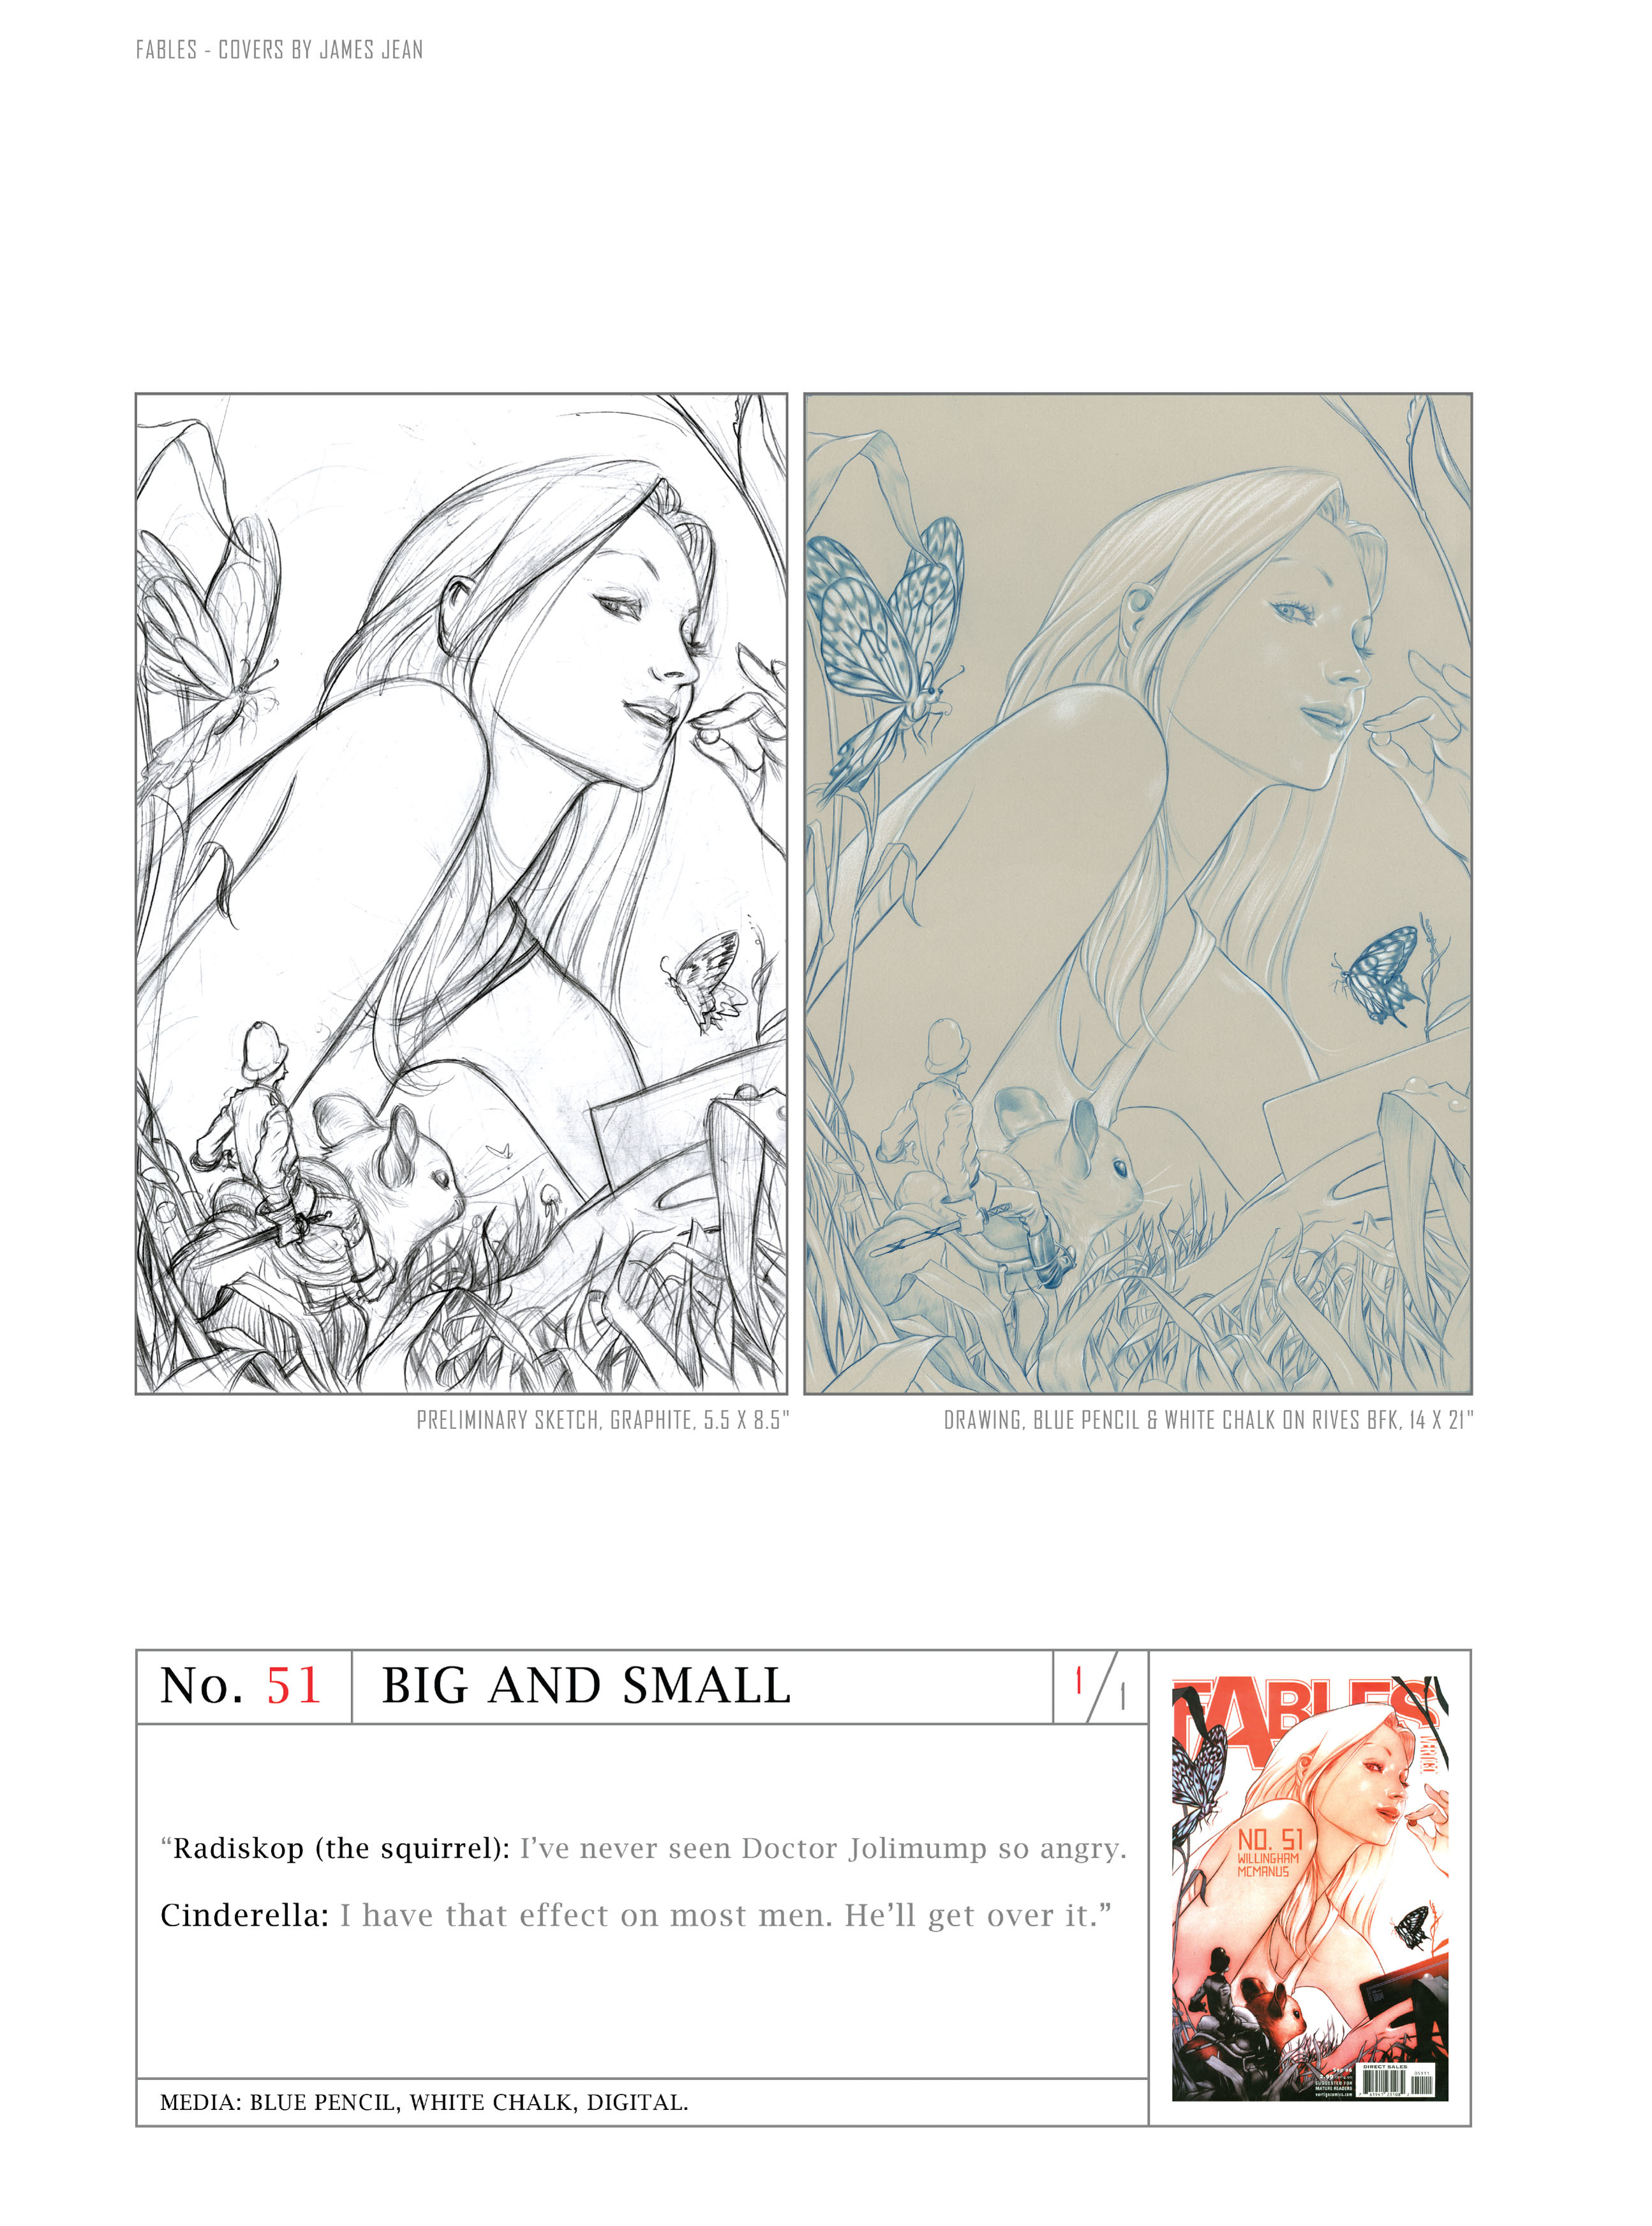 Read online Fables: Covers by James Jean comic -  Issue # TPB (Part 2) - 29